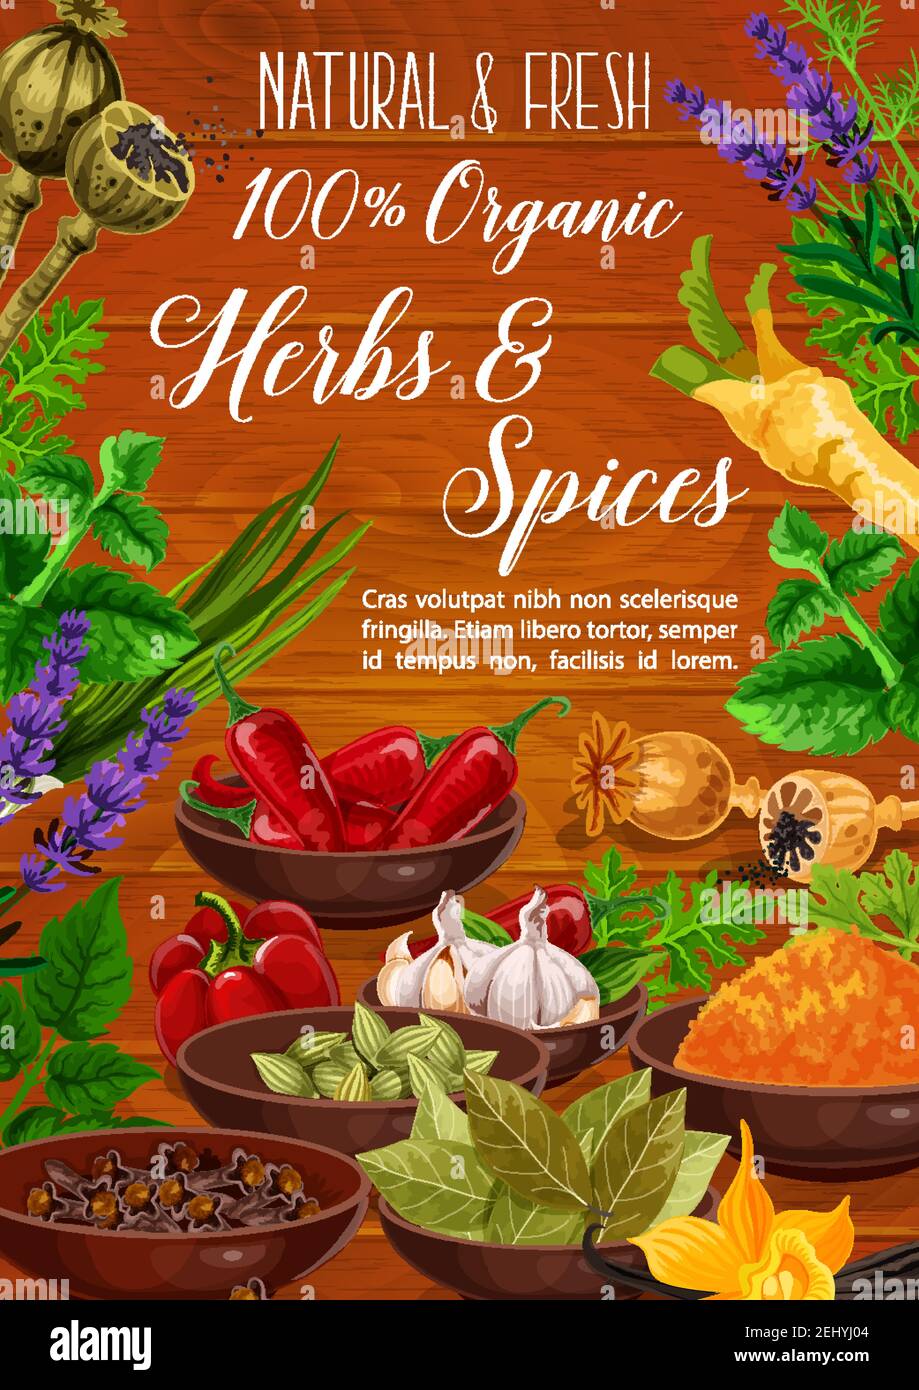 https://c8.alamy.com/comp/2EHYJ04/herbs-spices-cooking-condiments-and-vegetable-seasonings-vector-poster-pepper-garlic-and-parsley-chili-vanilla-and-mint-dill-turmeric-and-card-2EHYJ04.jpg